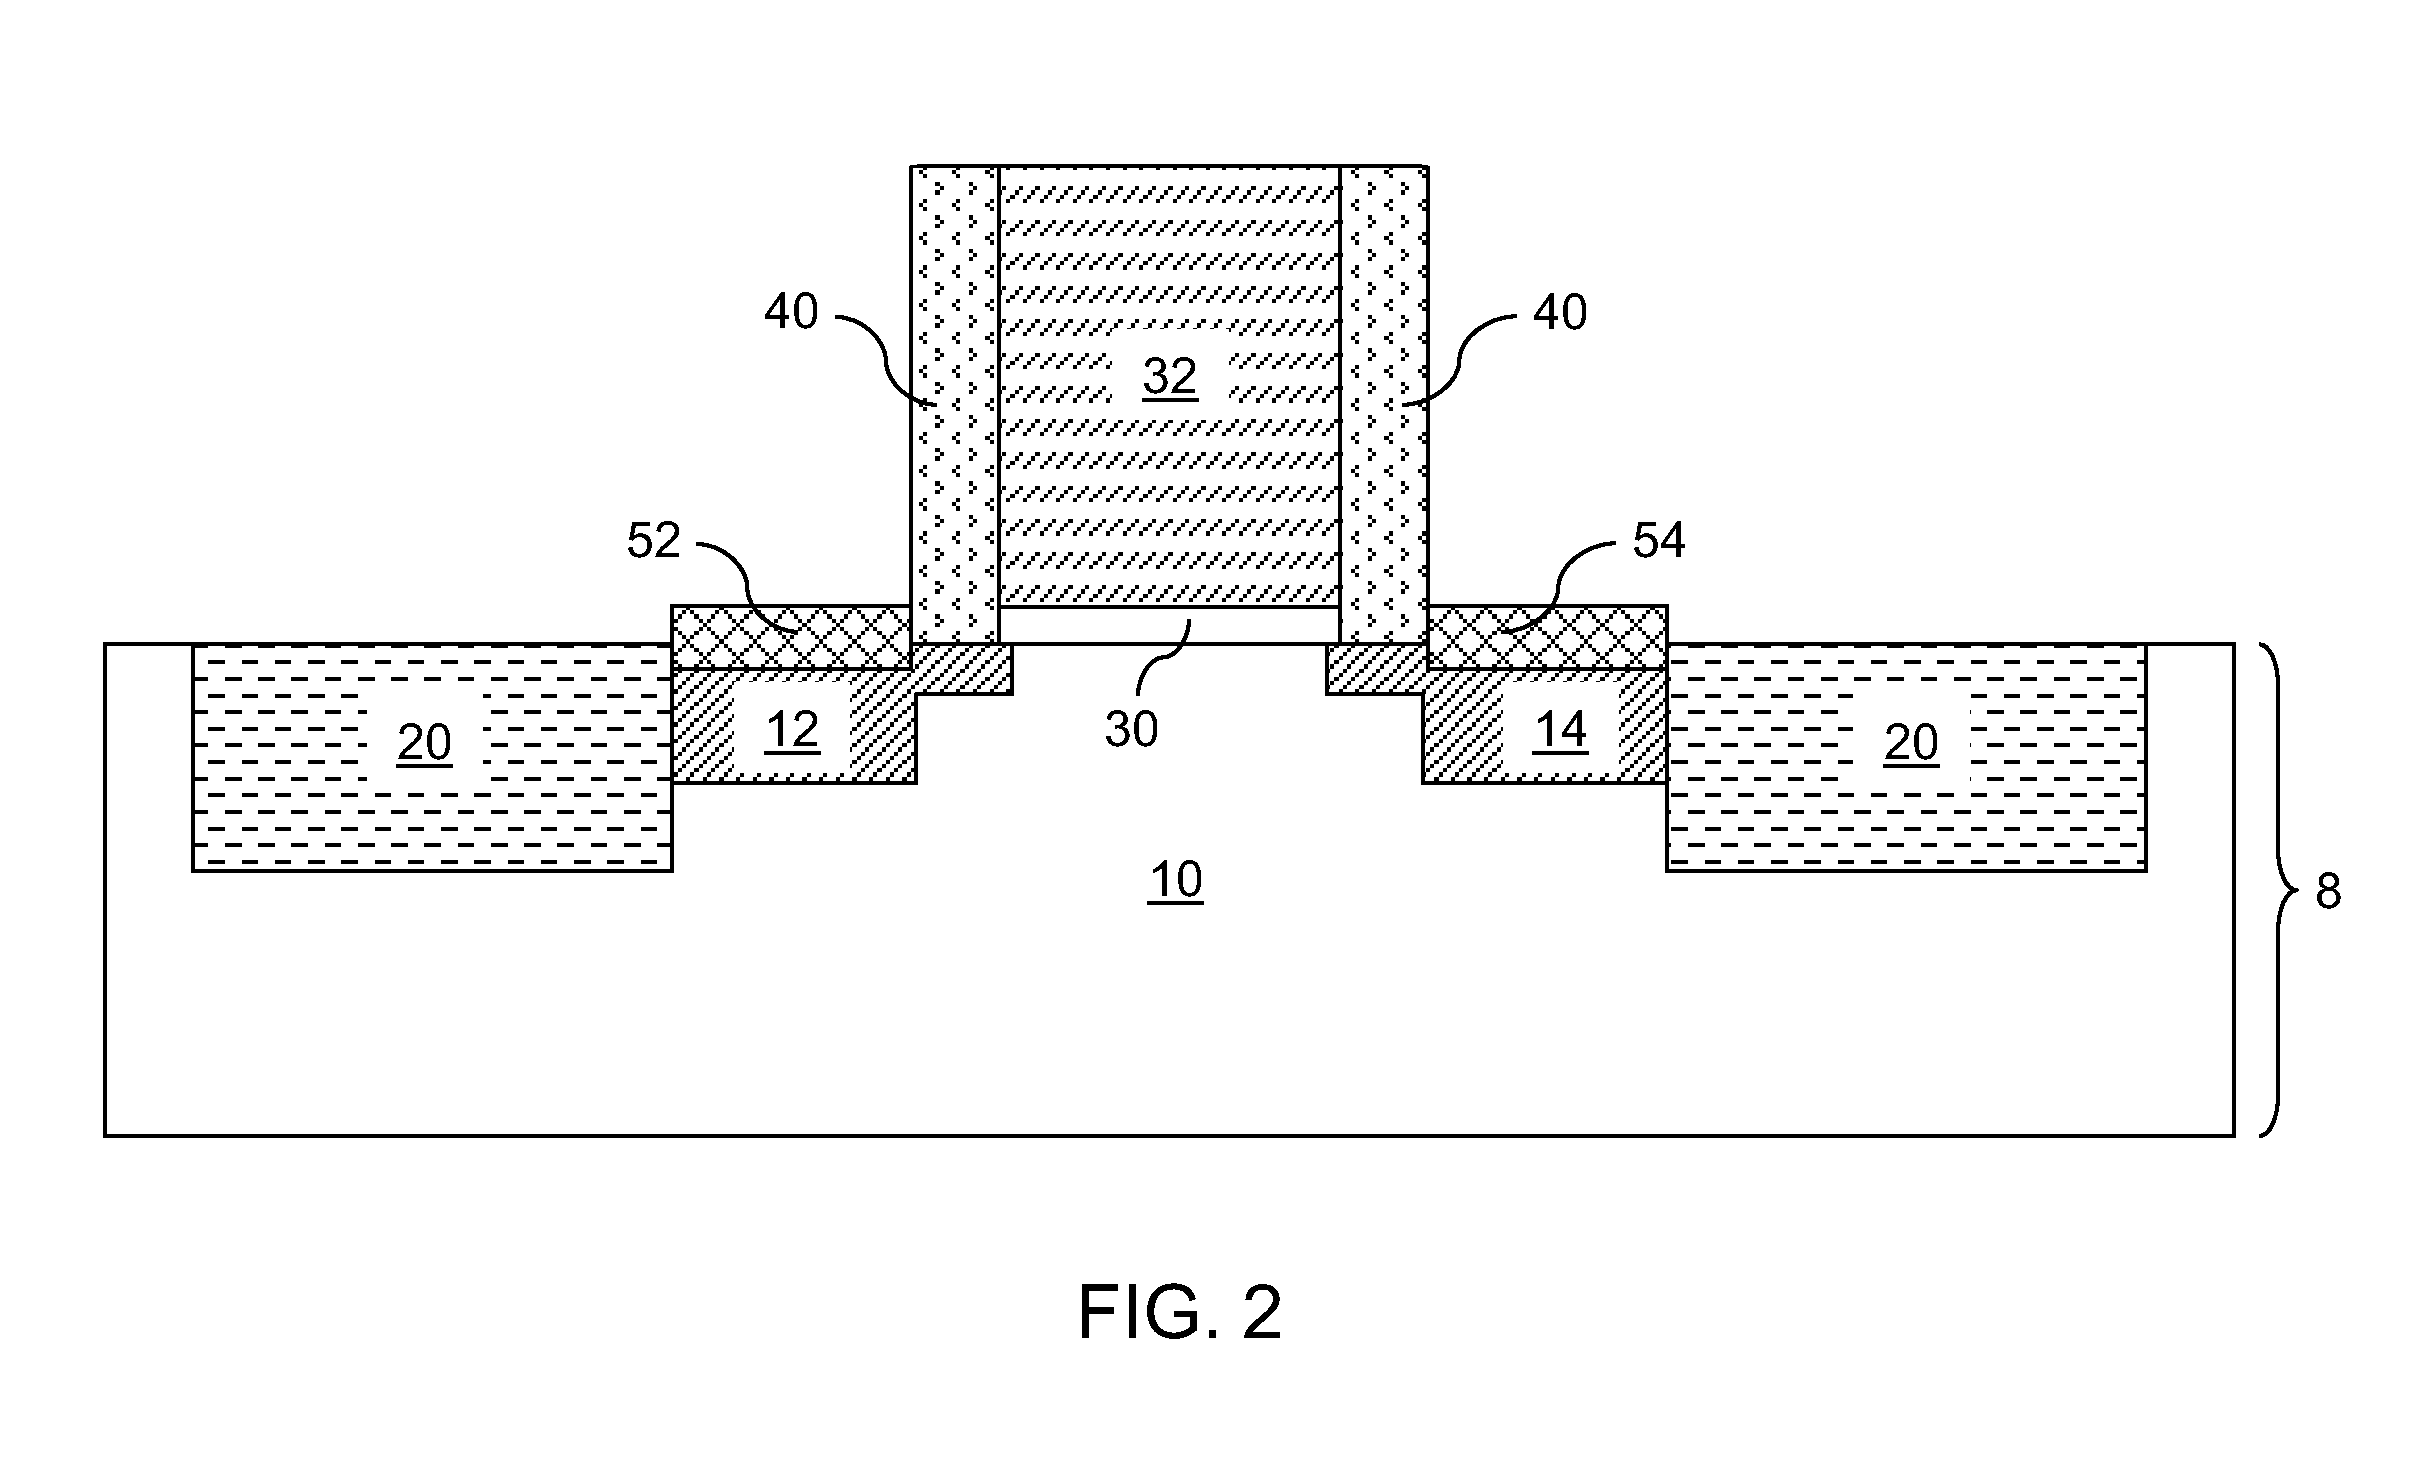 Replacement gate mosfet with self-aligned diffusion contact